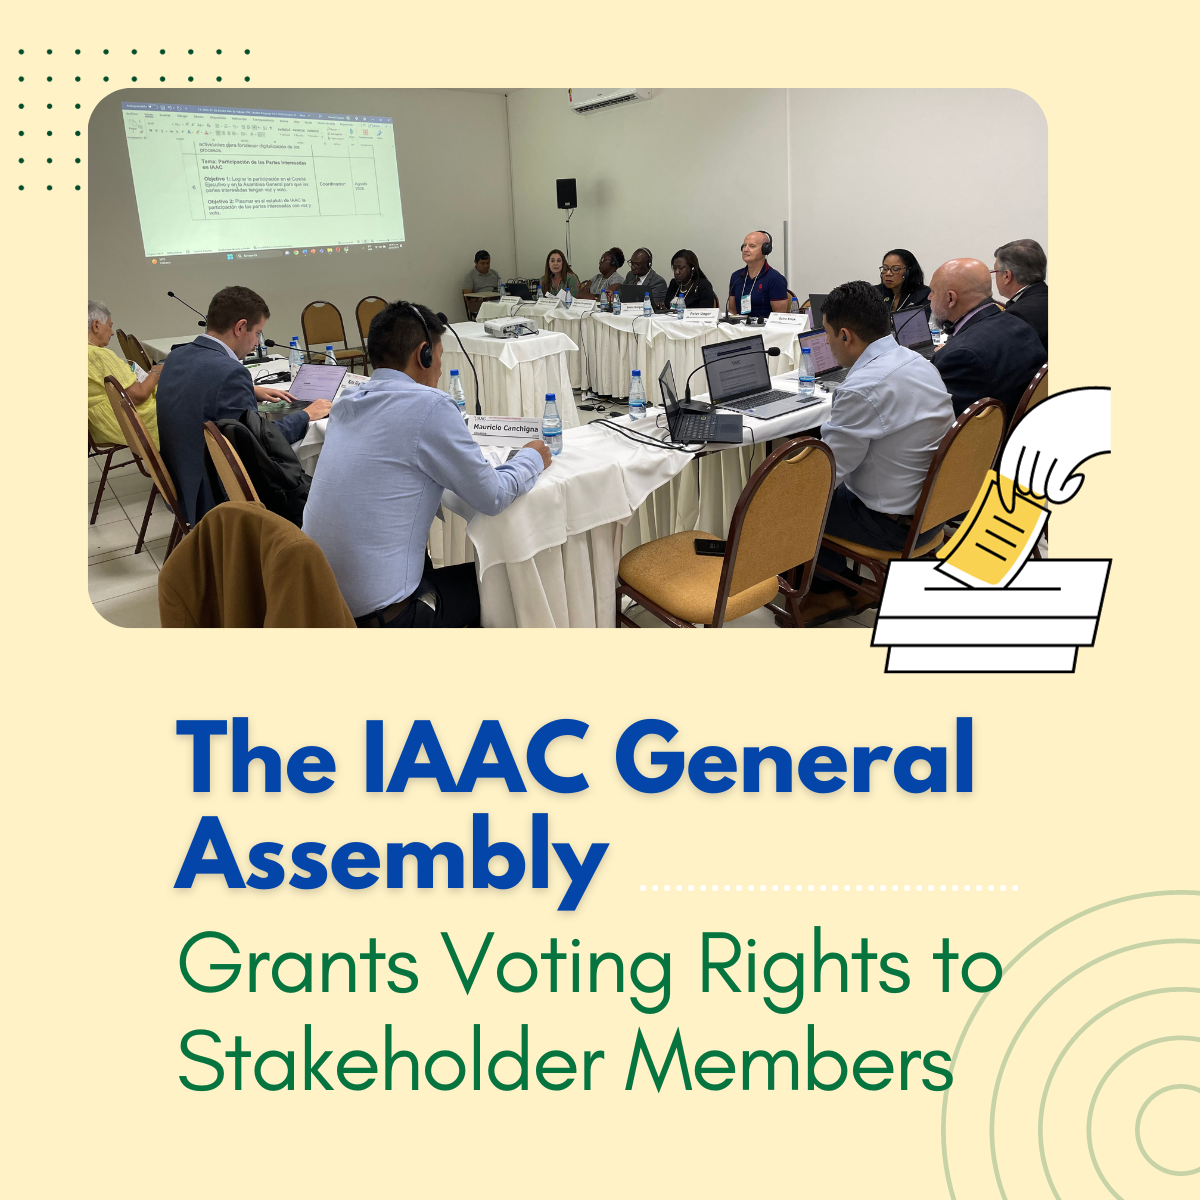 The IAAC General Assembly Grants Voting Rights to Stakeholder Members